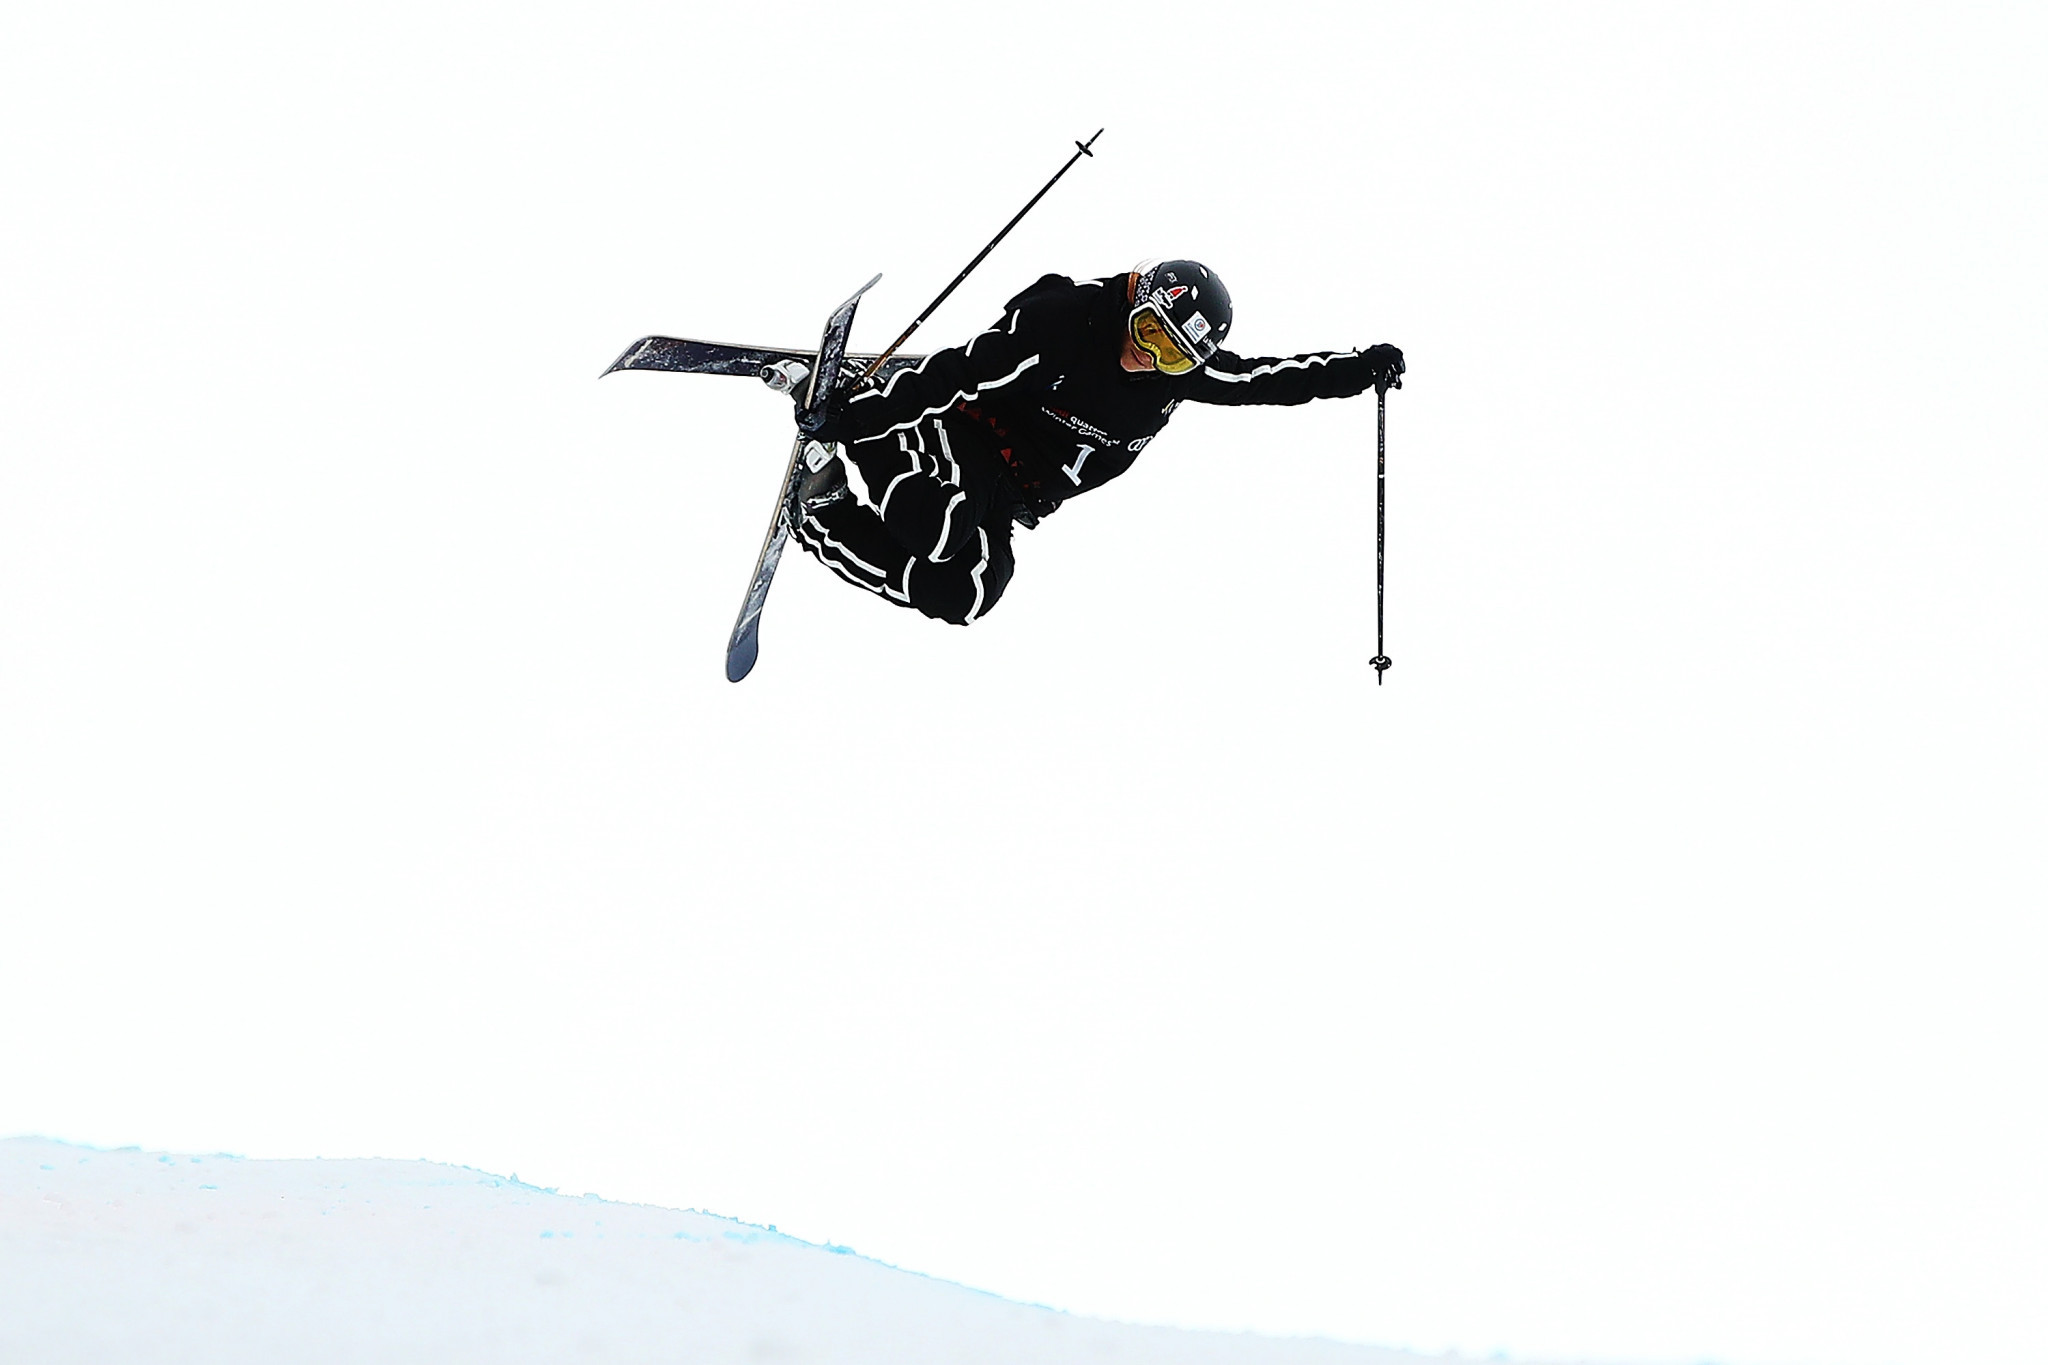 Martinod and Zhang head women's halfpipe qualifying at Copper Mountain